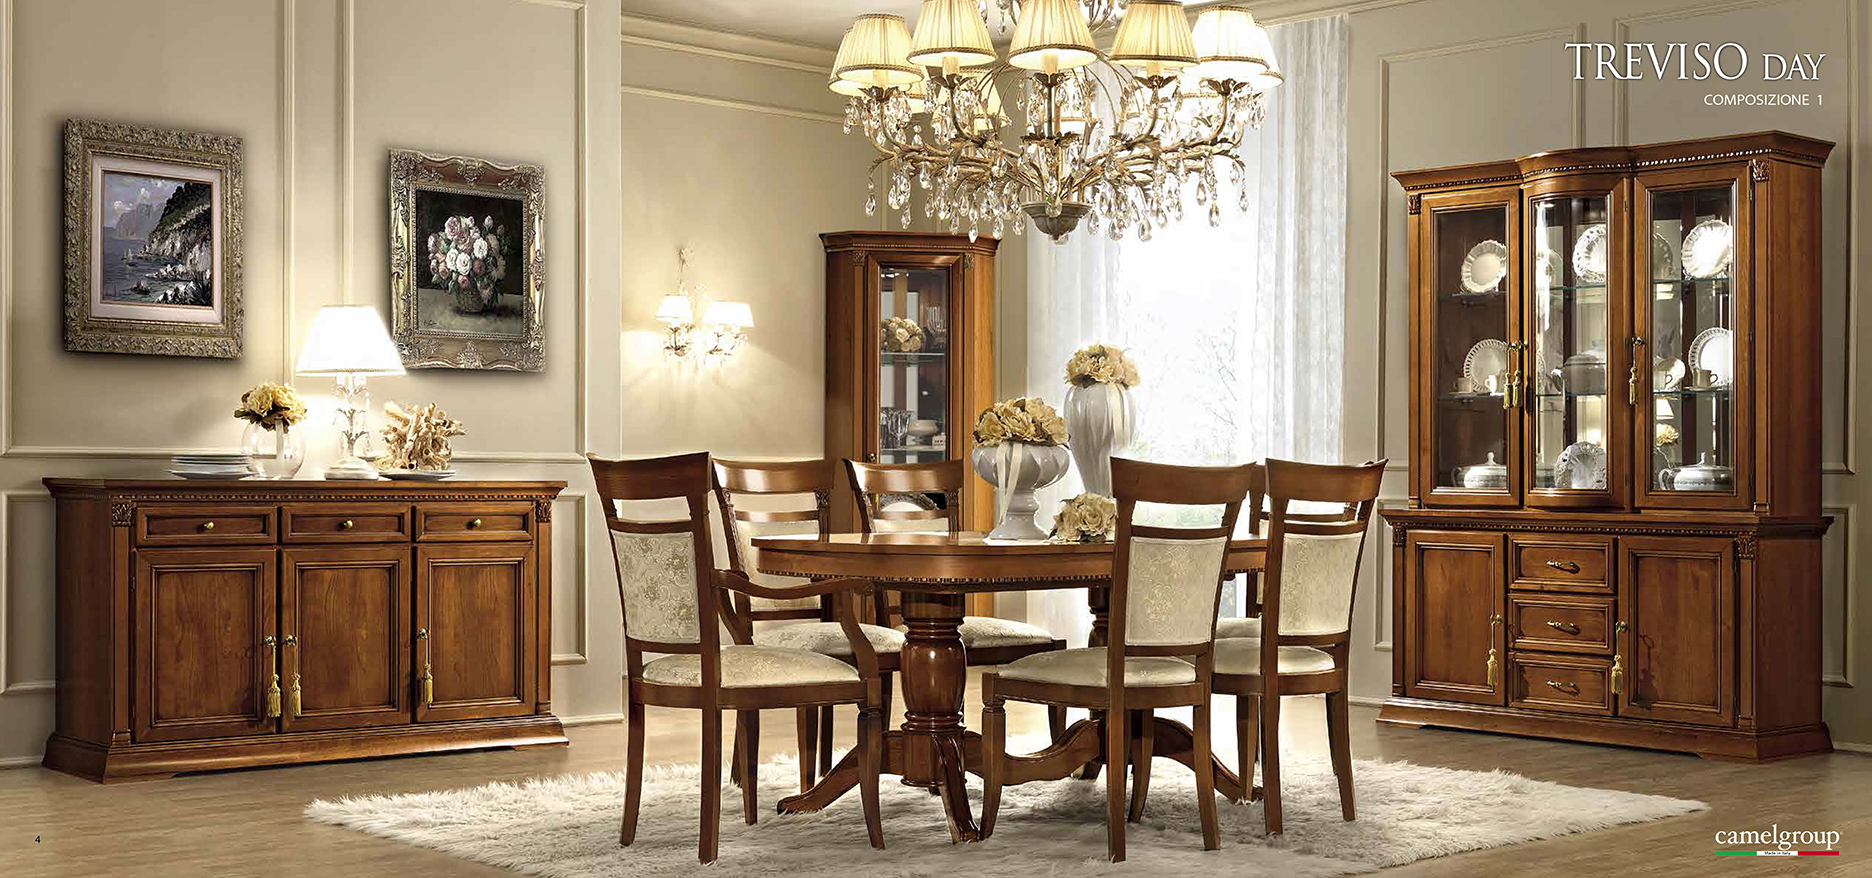 Dining Room Furniture Chairs Treviso Cherry Day